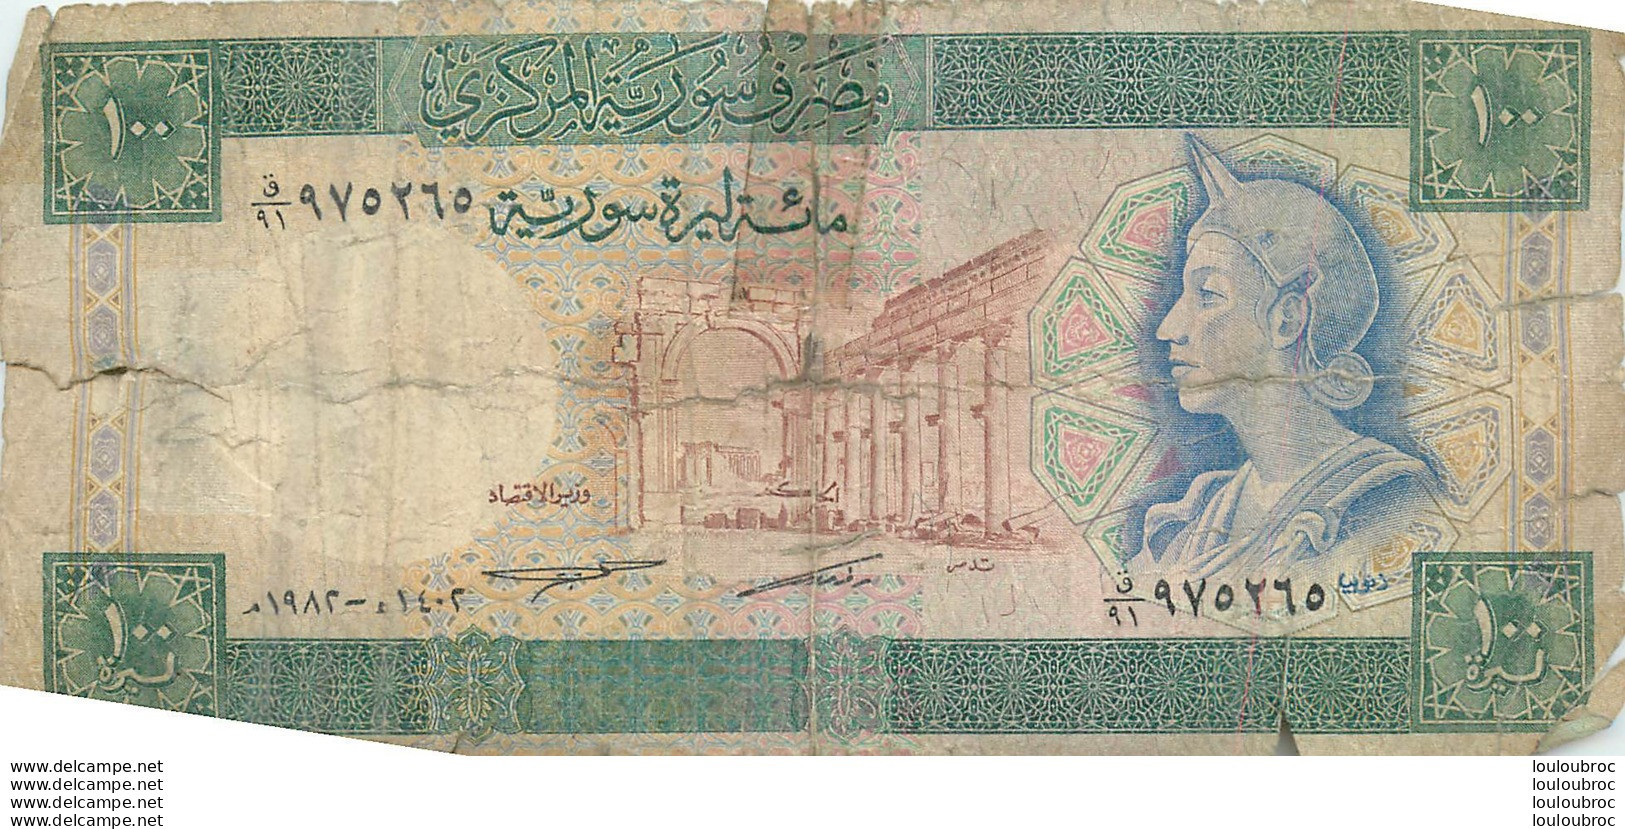 BILLET   SYRIE 100 ONE HUNDRED SYRIAN POUNDS - Siria